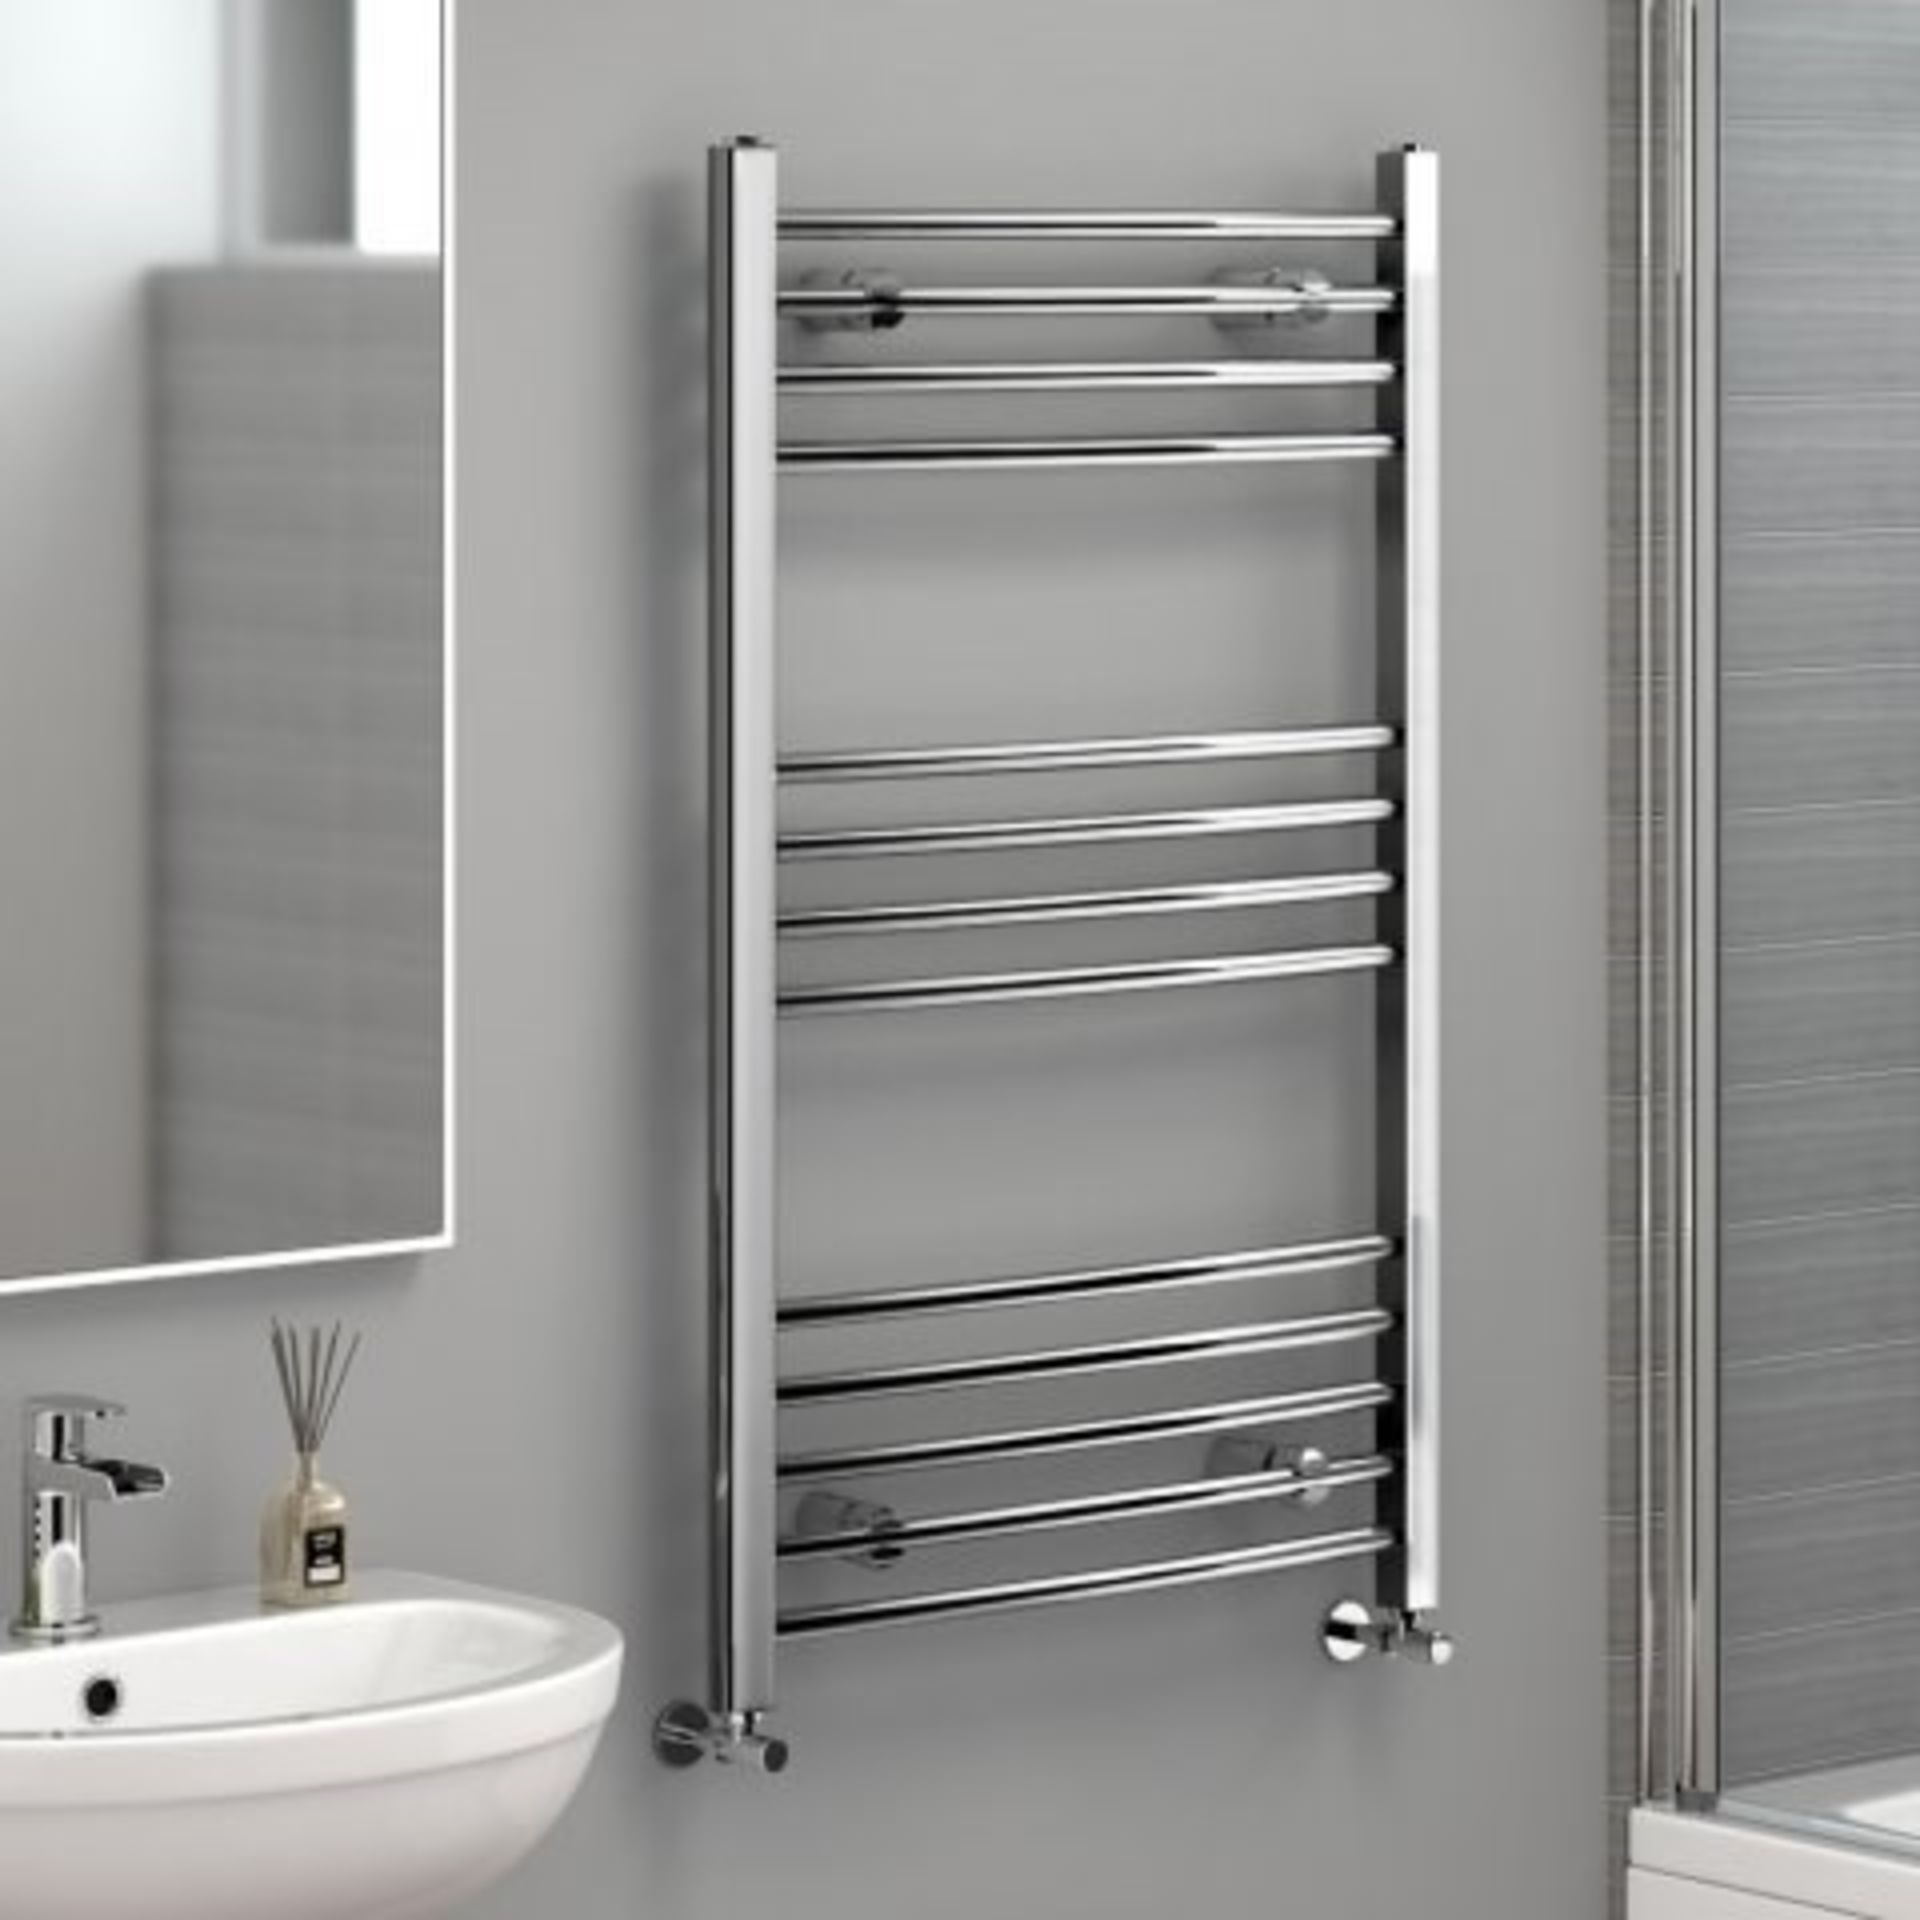 BRAND NEW BOXED 1200x600mm - 20mm Tubes - RRP £219.99.Chrome Curved Rail Ladder Towel Radiator.Our